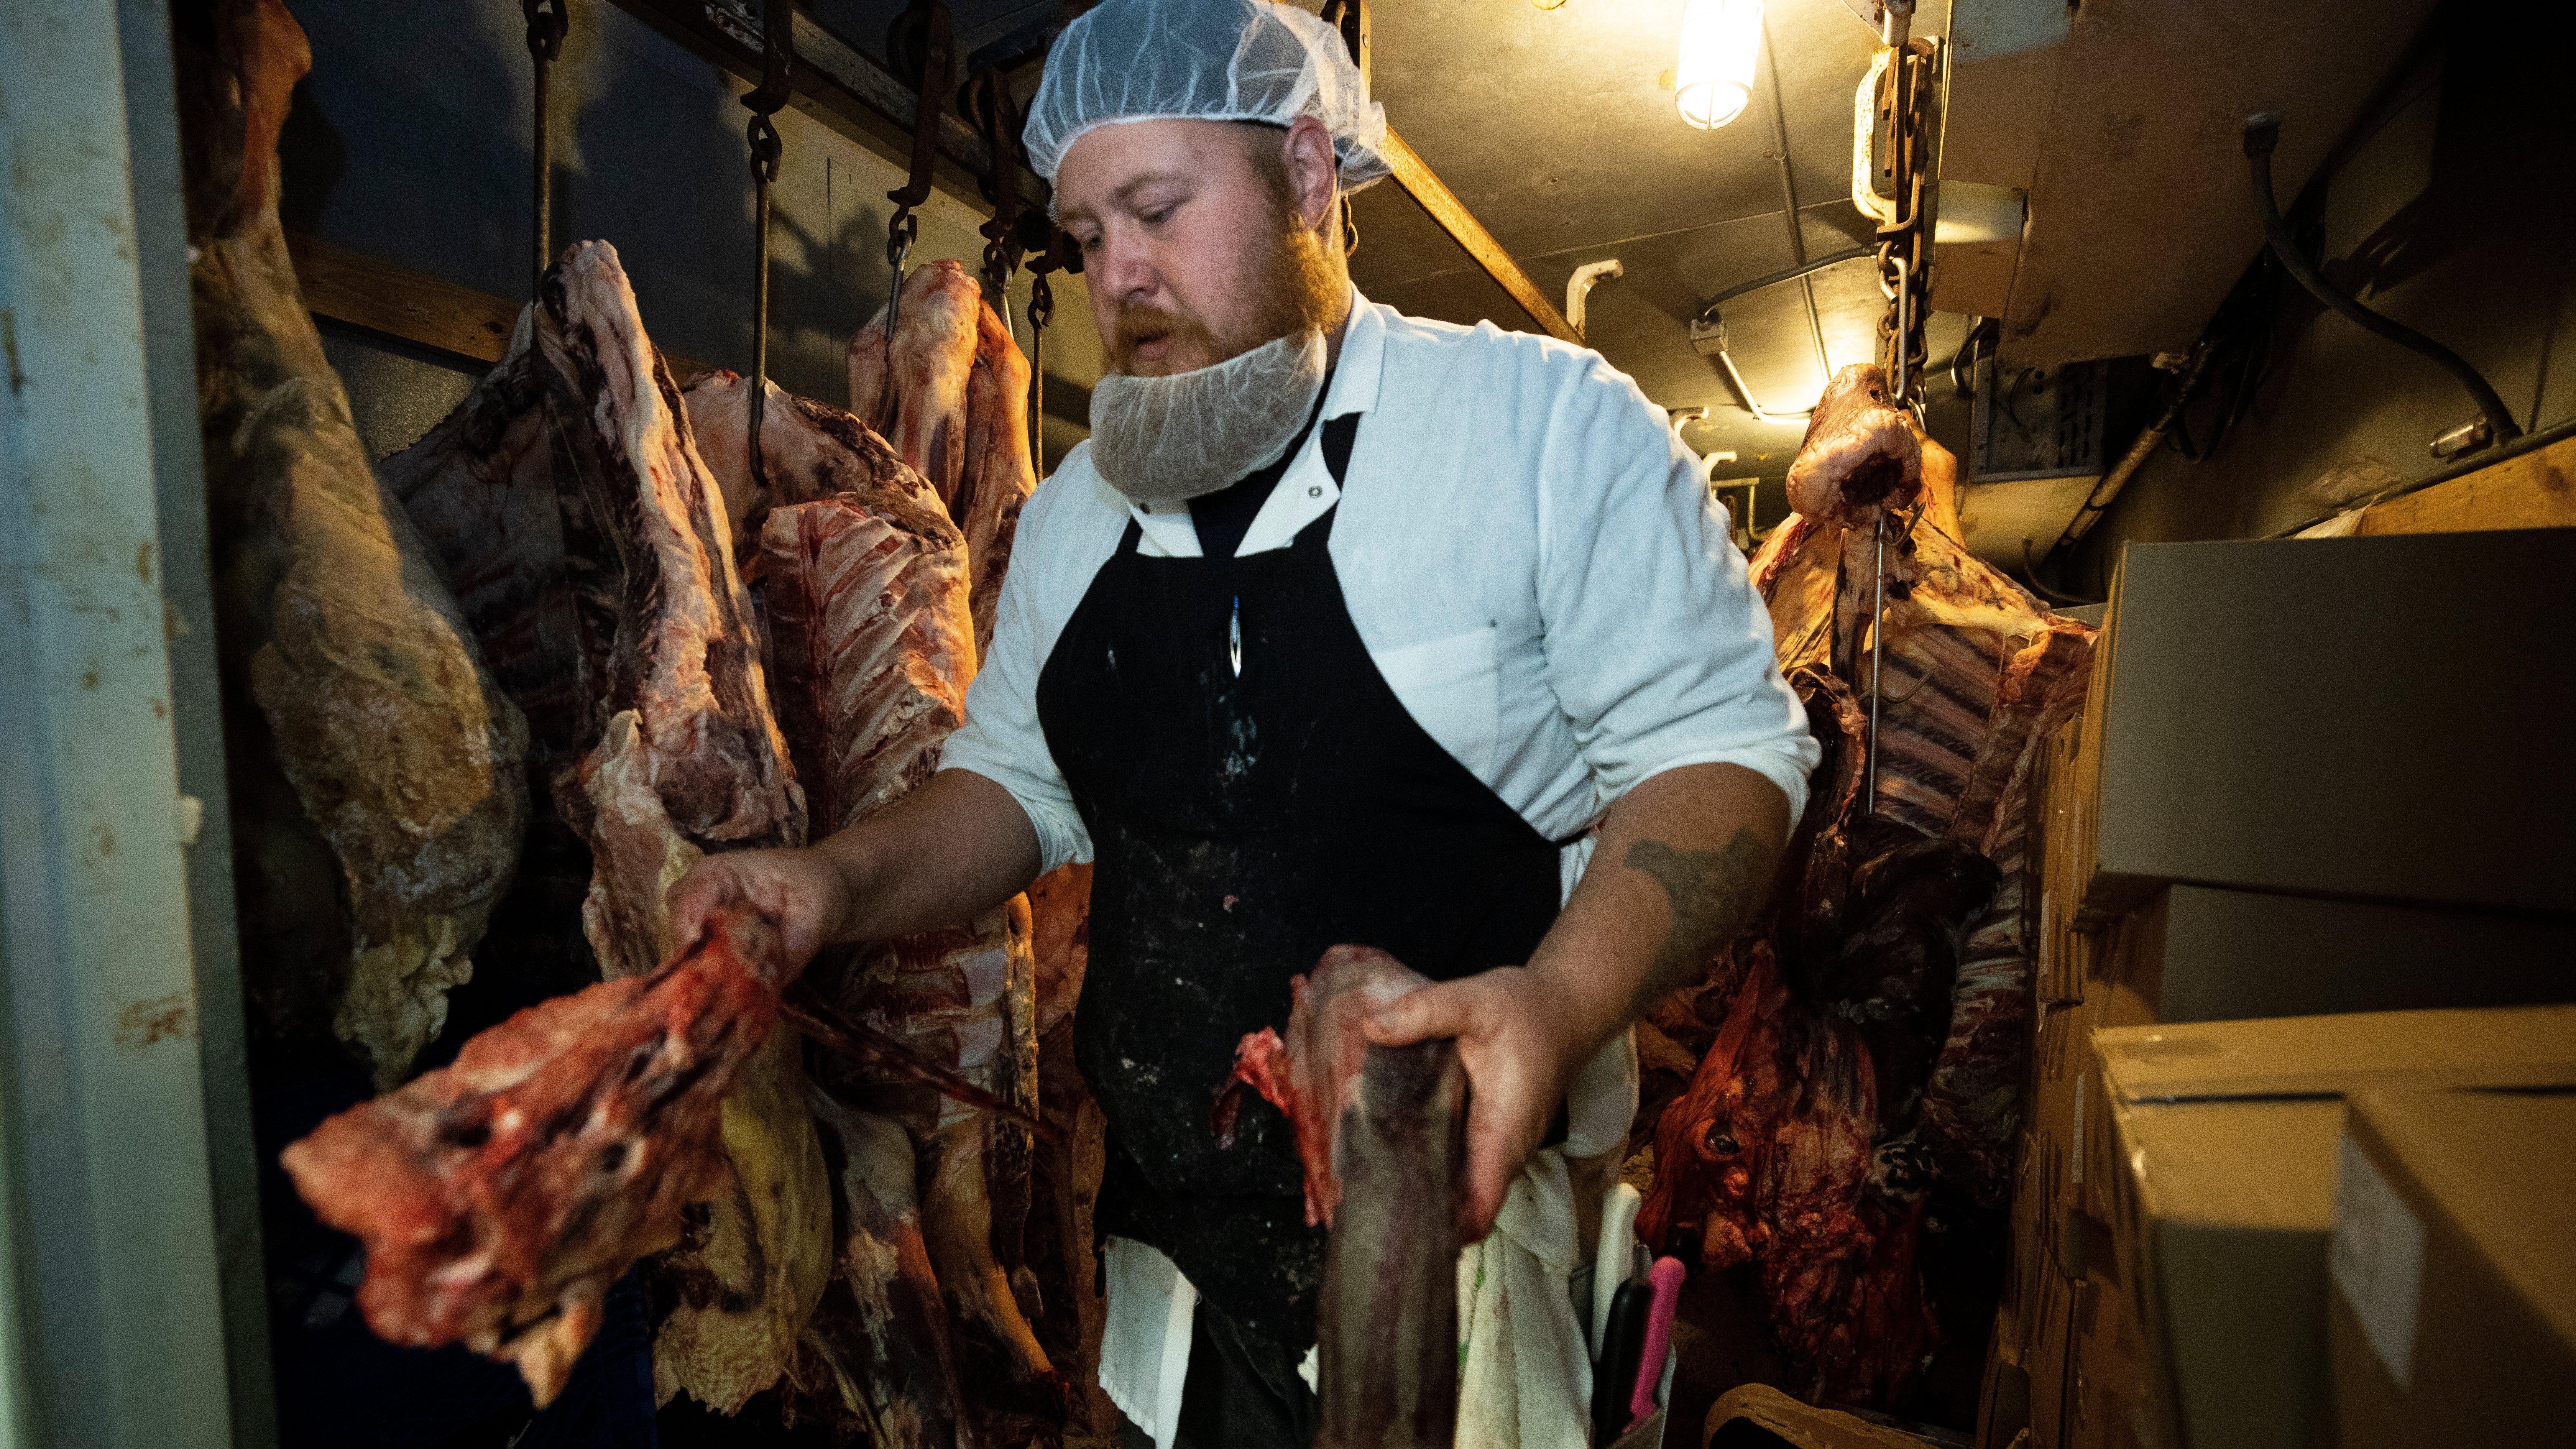 Butchers at Old Fashion Country Butcher process meat as they work to meet increased demand due to COVID-19 related shortages on May 21, 2020 in Santa Paula, California. T (Photo: Brent Stirton, Getty Images)